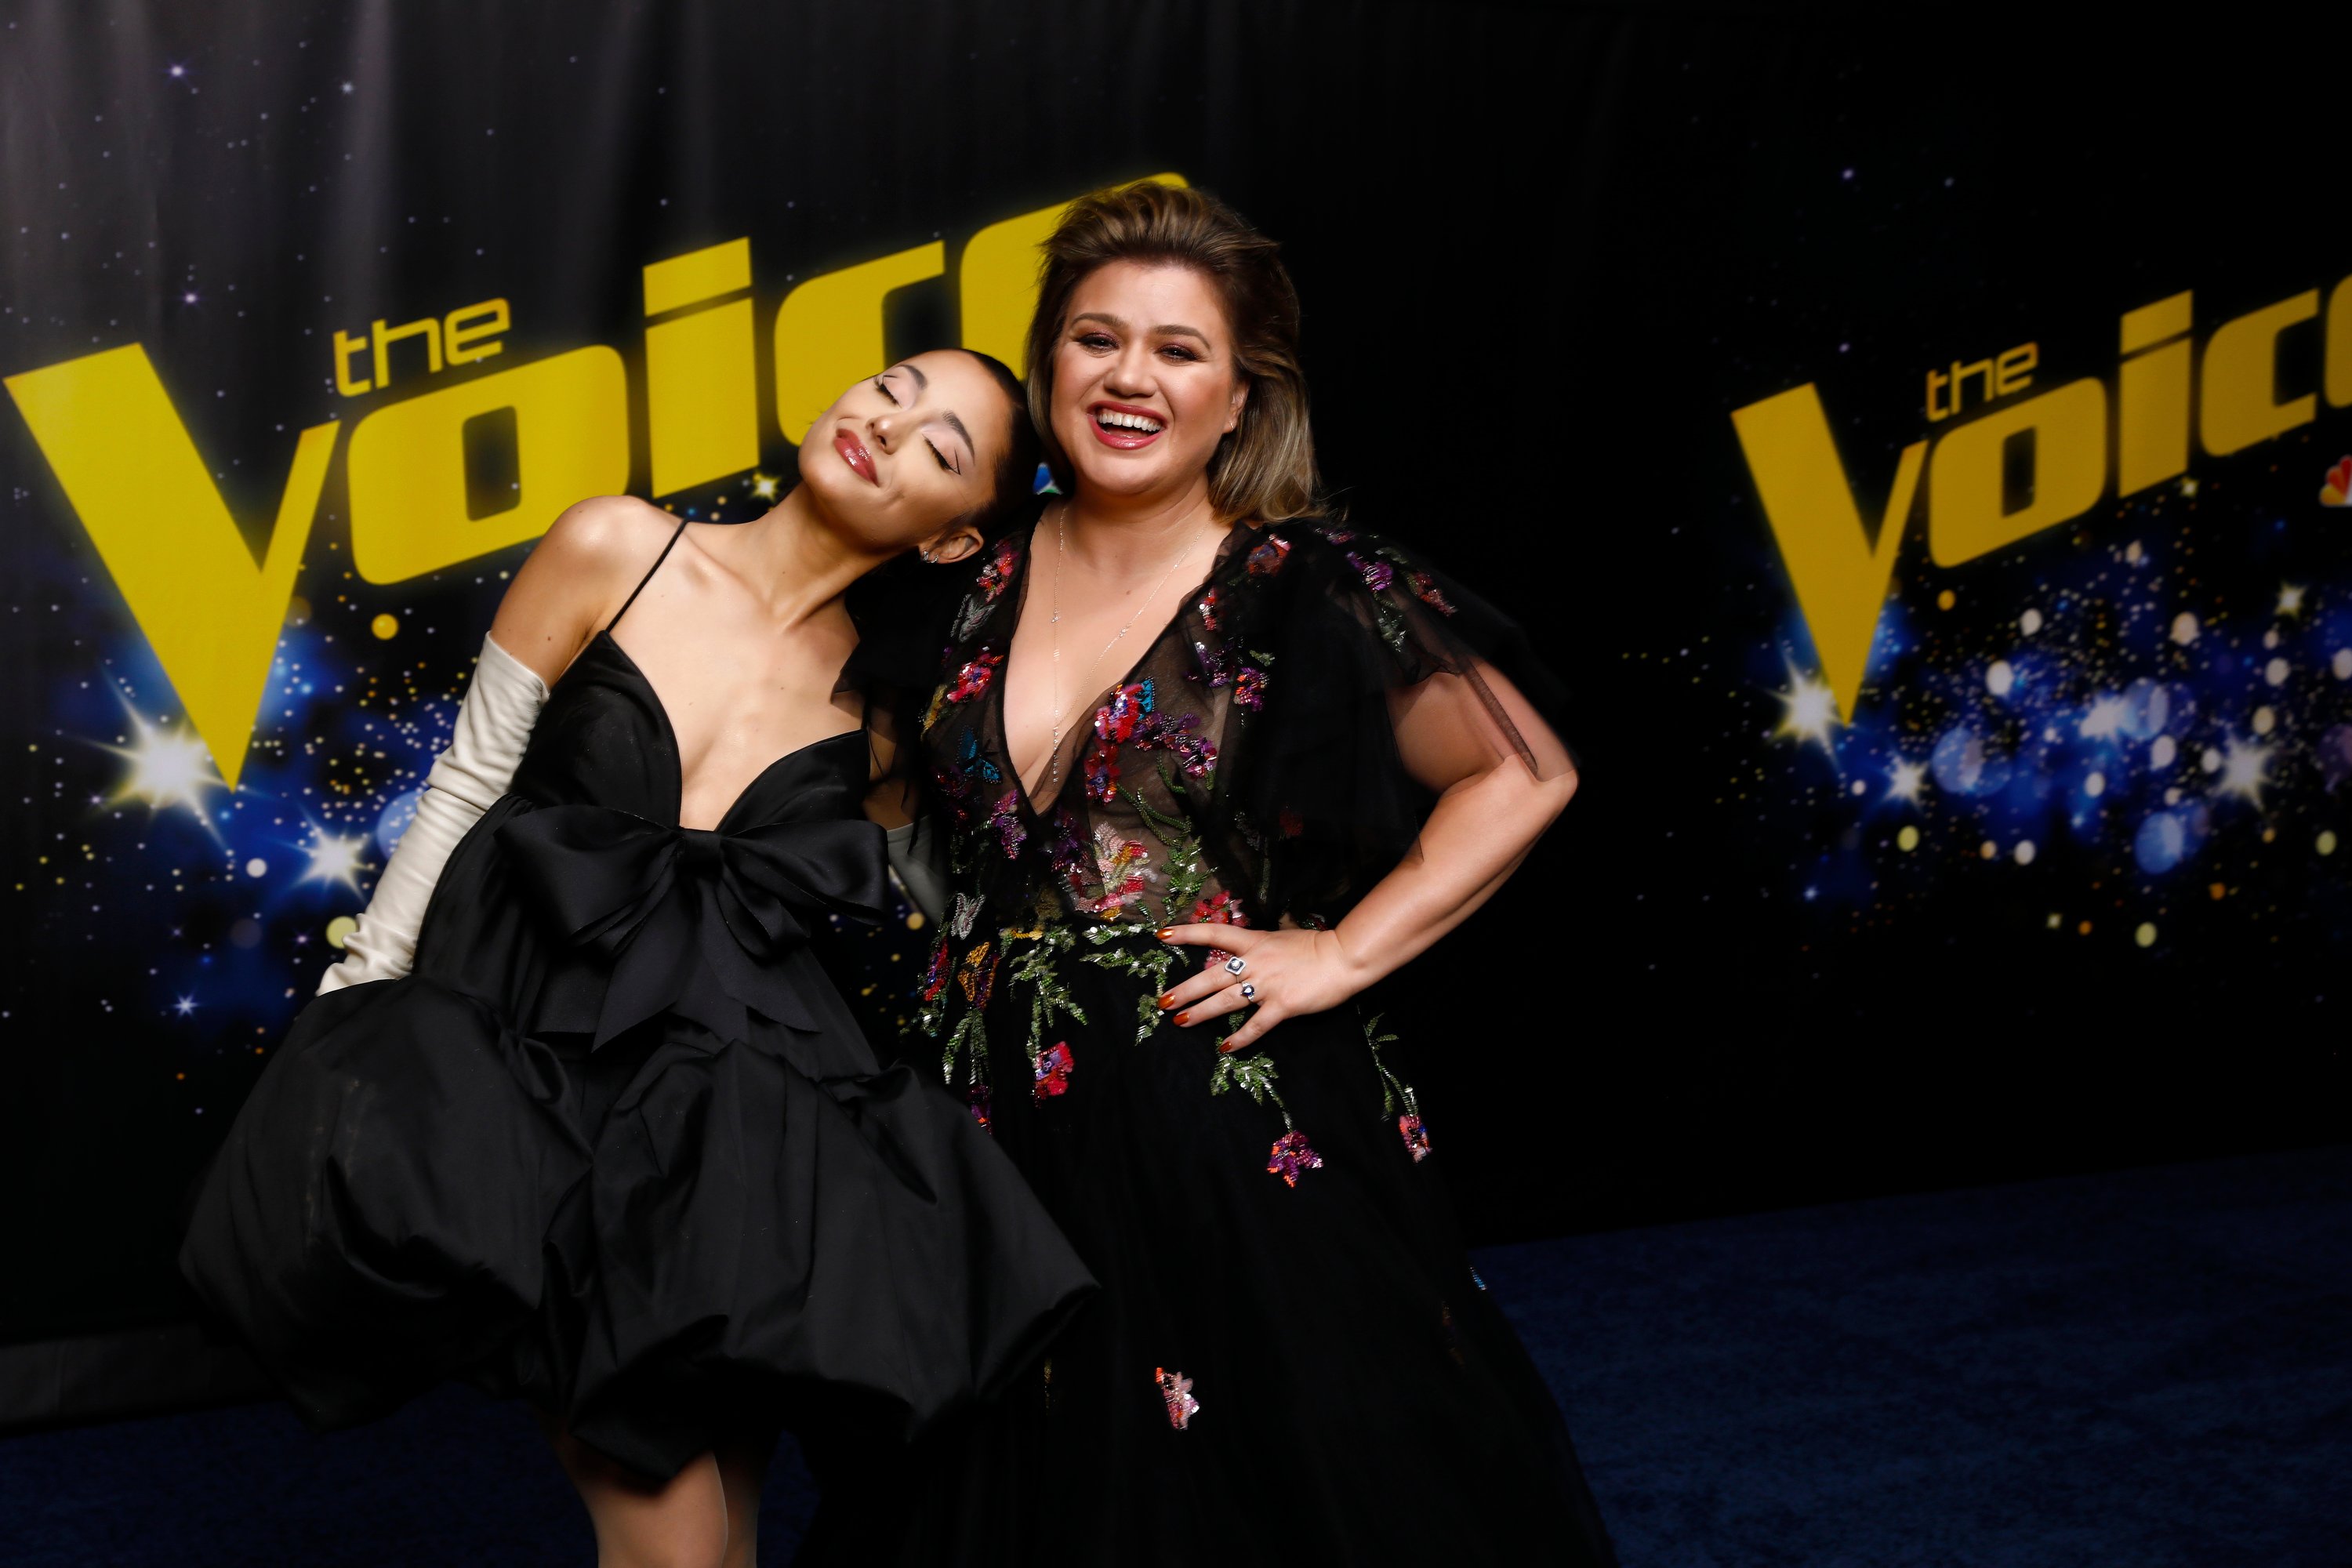 'The Voice' episode titled 'Live Top 10 Performances' featuring Ariana Grande and Kelly Clarkson